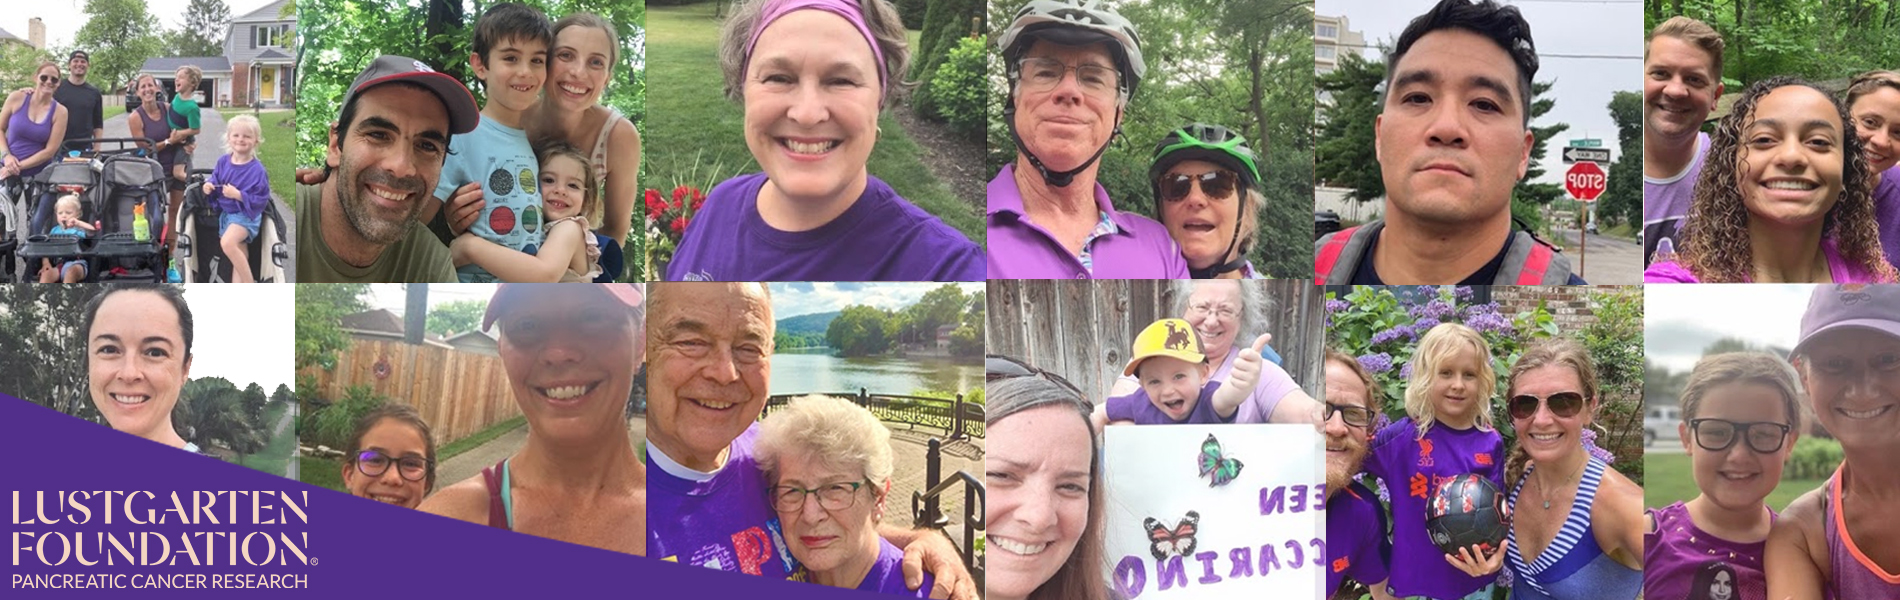 Join the Lustgarten Foundation As We Walk Virtually For Pancreatic Cancer